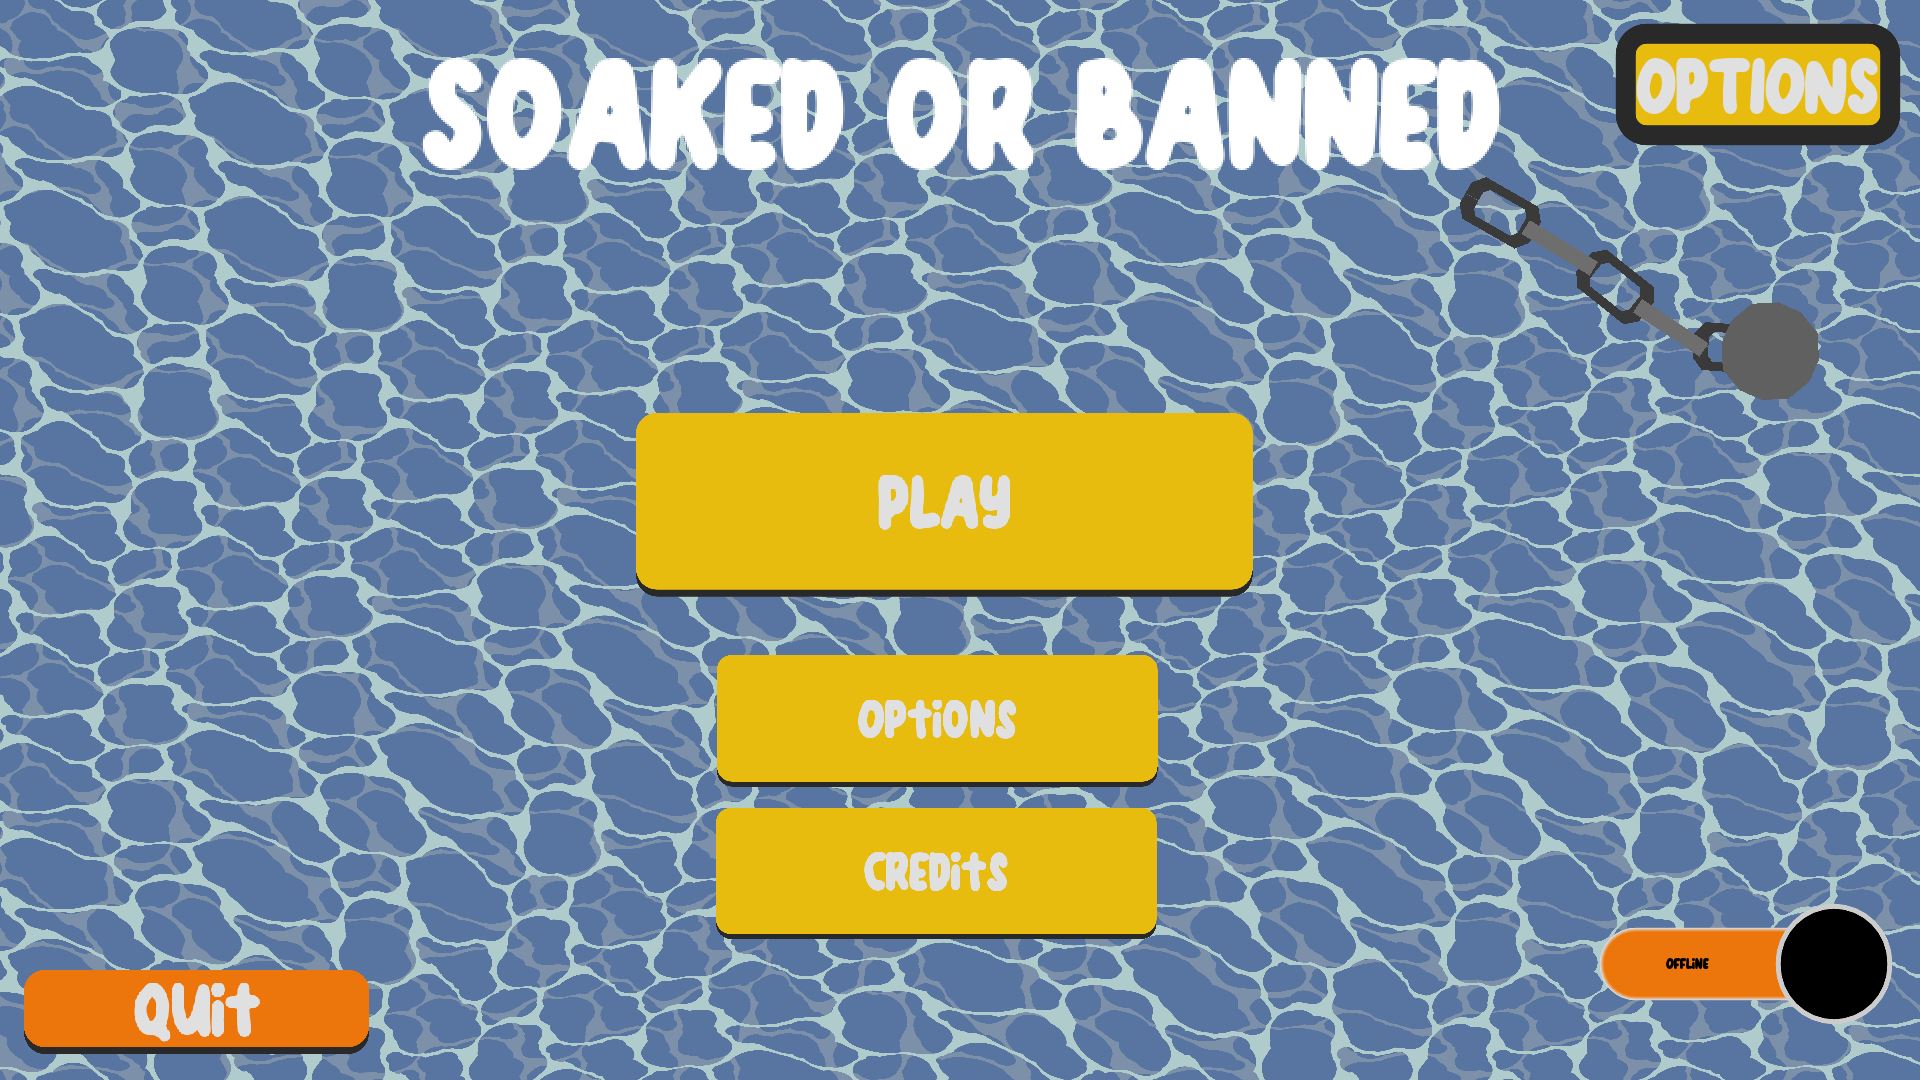 Poster of Soaked or banned